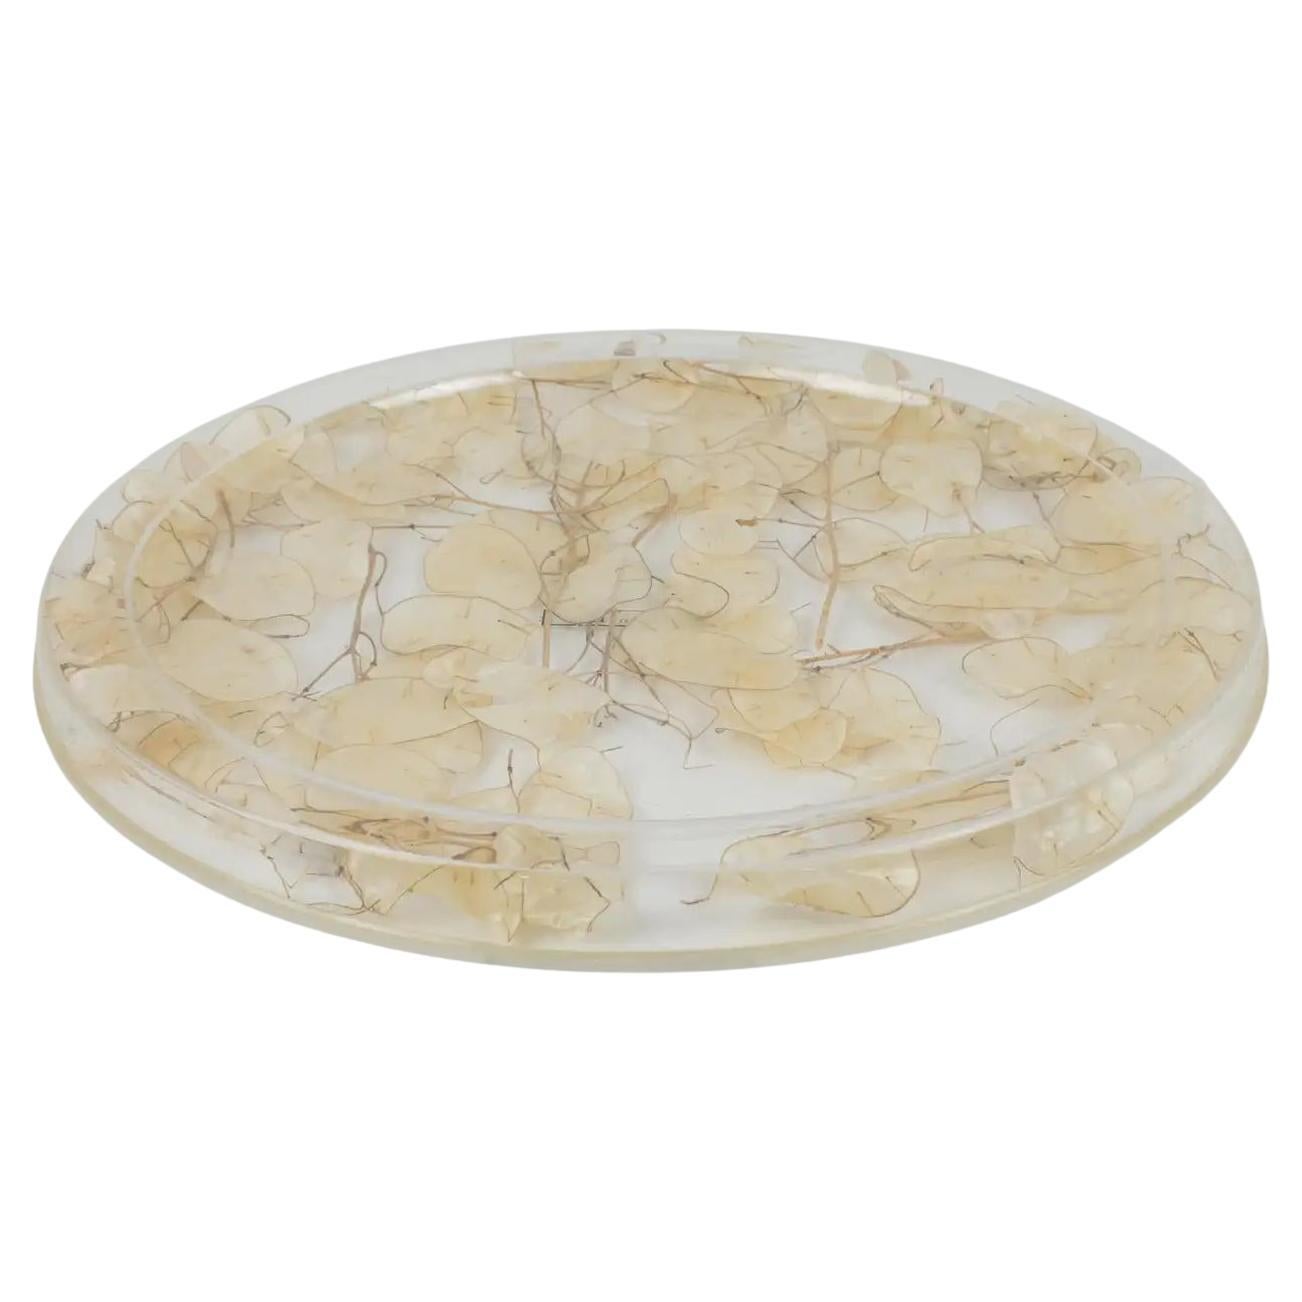 Christian Dior Home Collection Lucite Tray Board Platter with Dried Lunaria